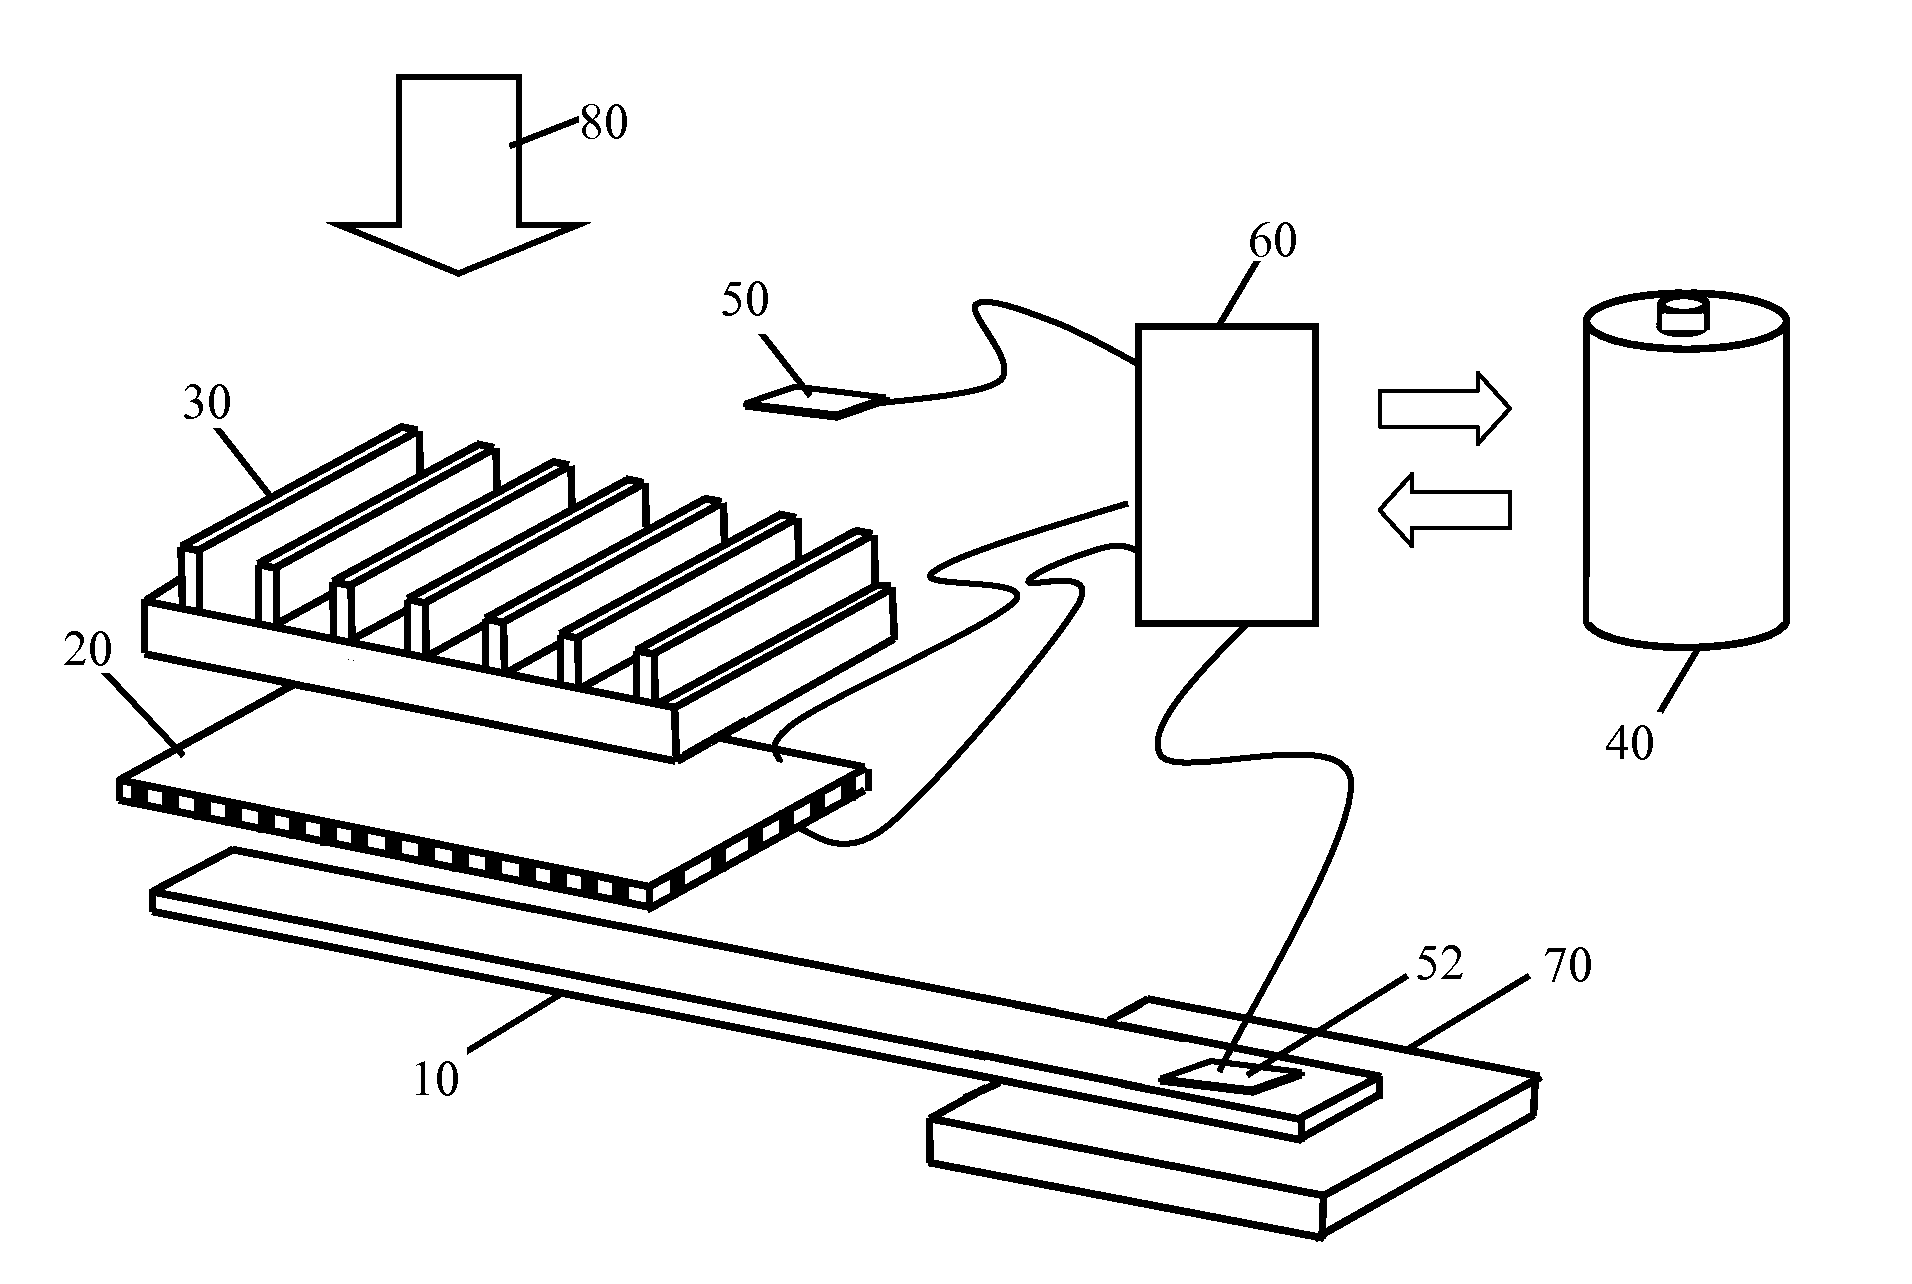 Dynamic switching thermoelectric thermal management systems and methods